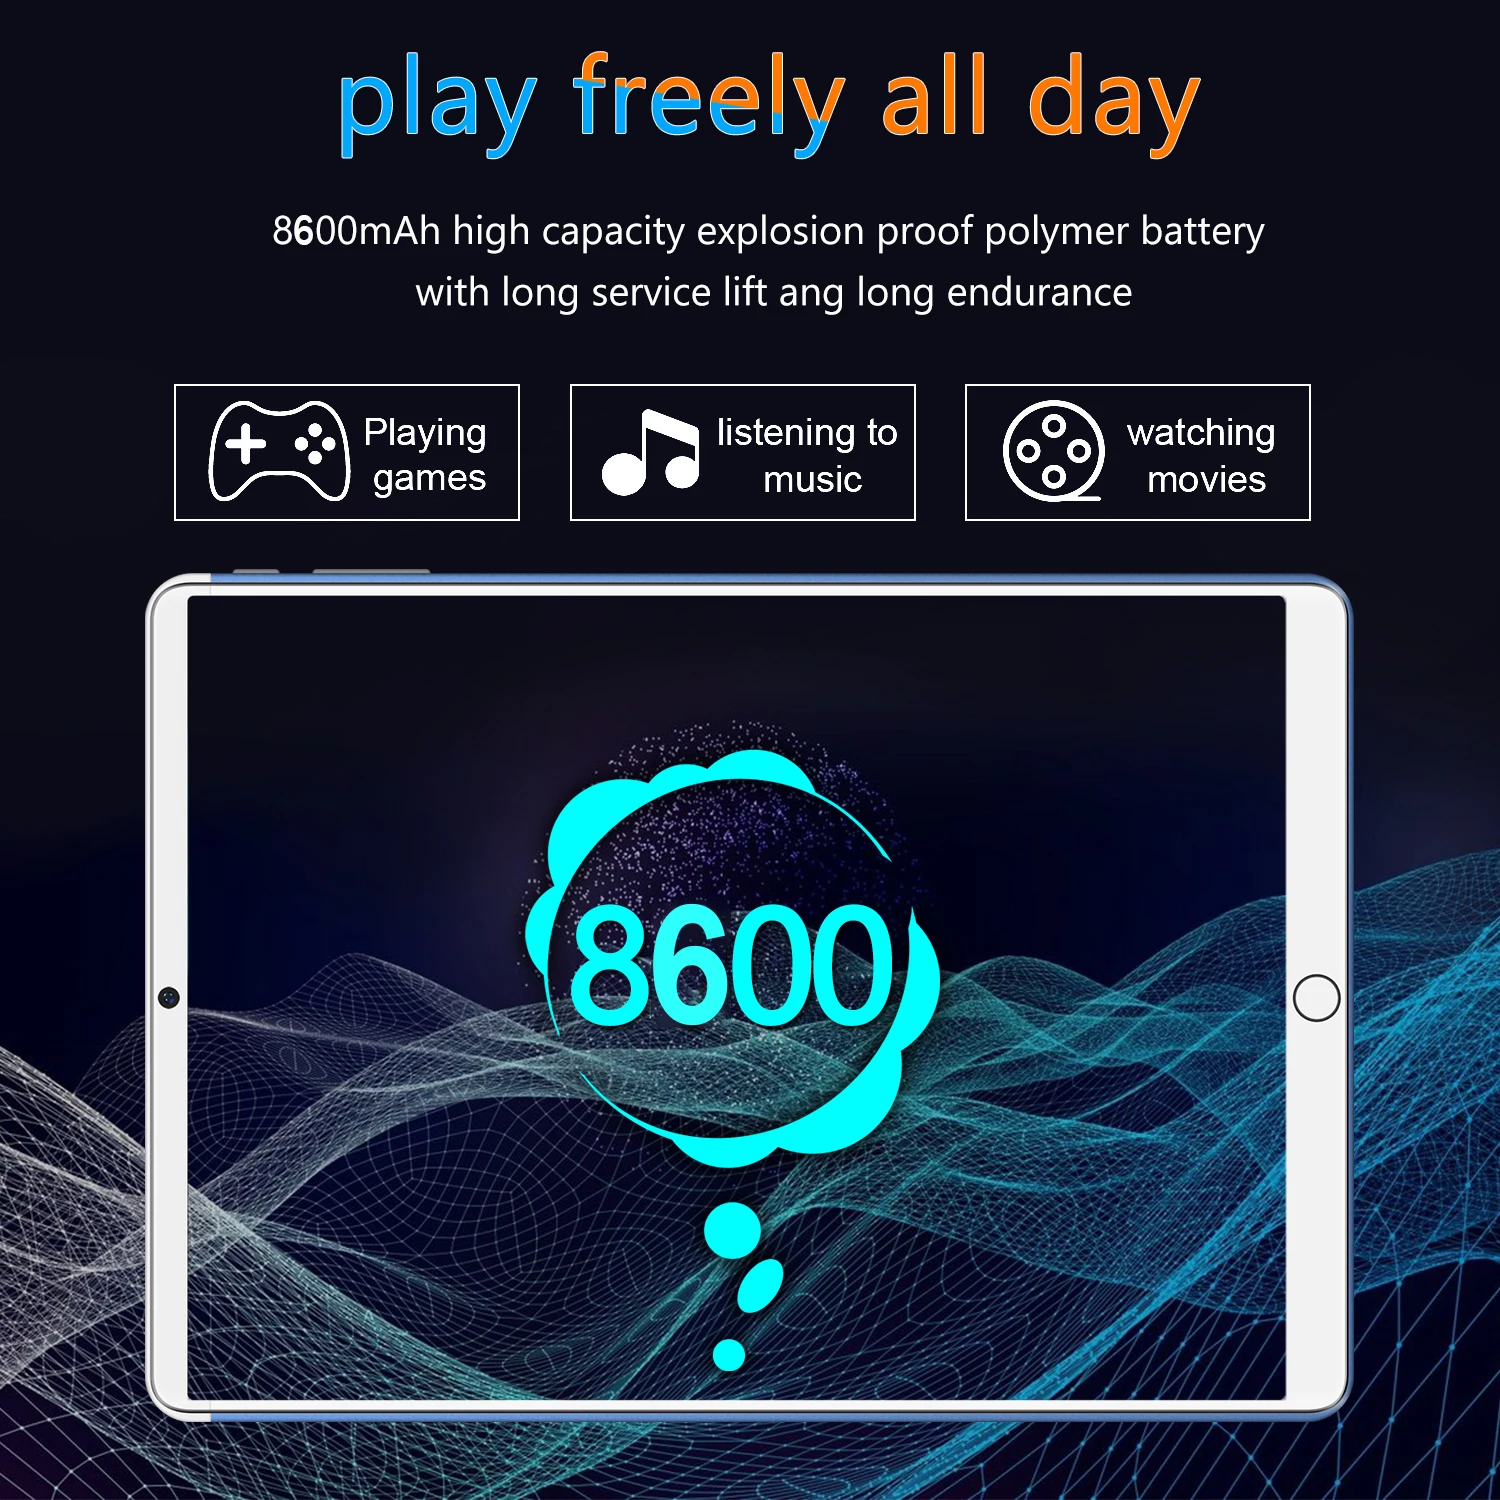 12GB 512GB Google Play 5G WPS Office Computer Pad Air Tablet Android Global Version Notebook 4G LTE Laptop Dual SIM 8600mAh most popular apple ipad